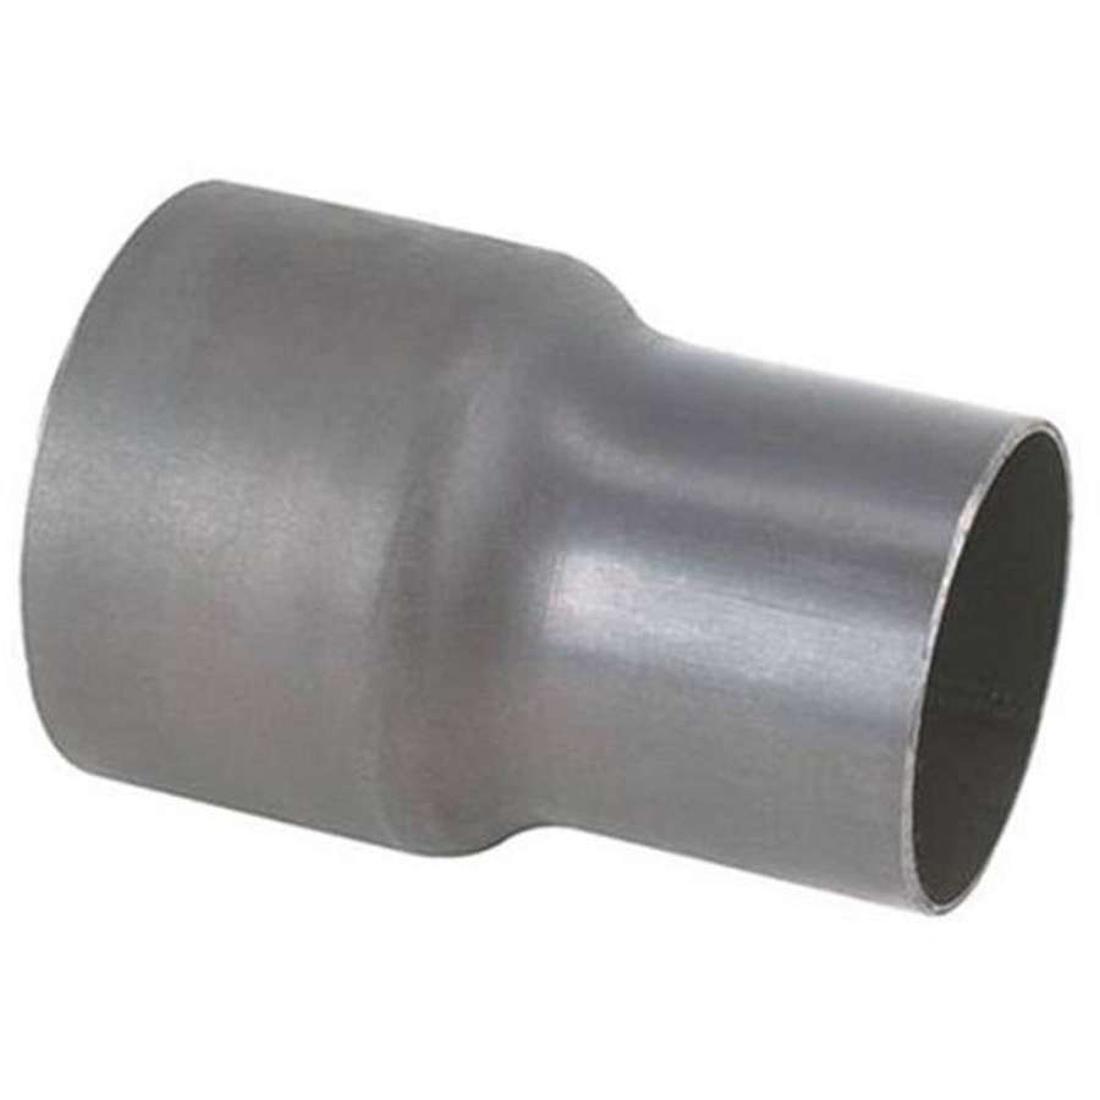 Exhaust Pipe Reducer 3" 76mm - 3.5" 89mm Mild Steel image